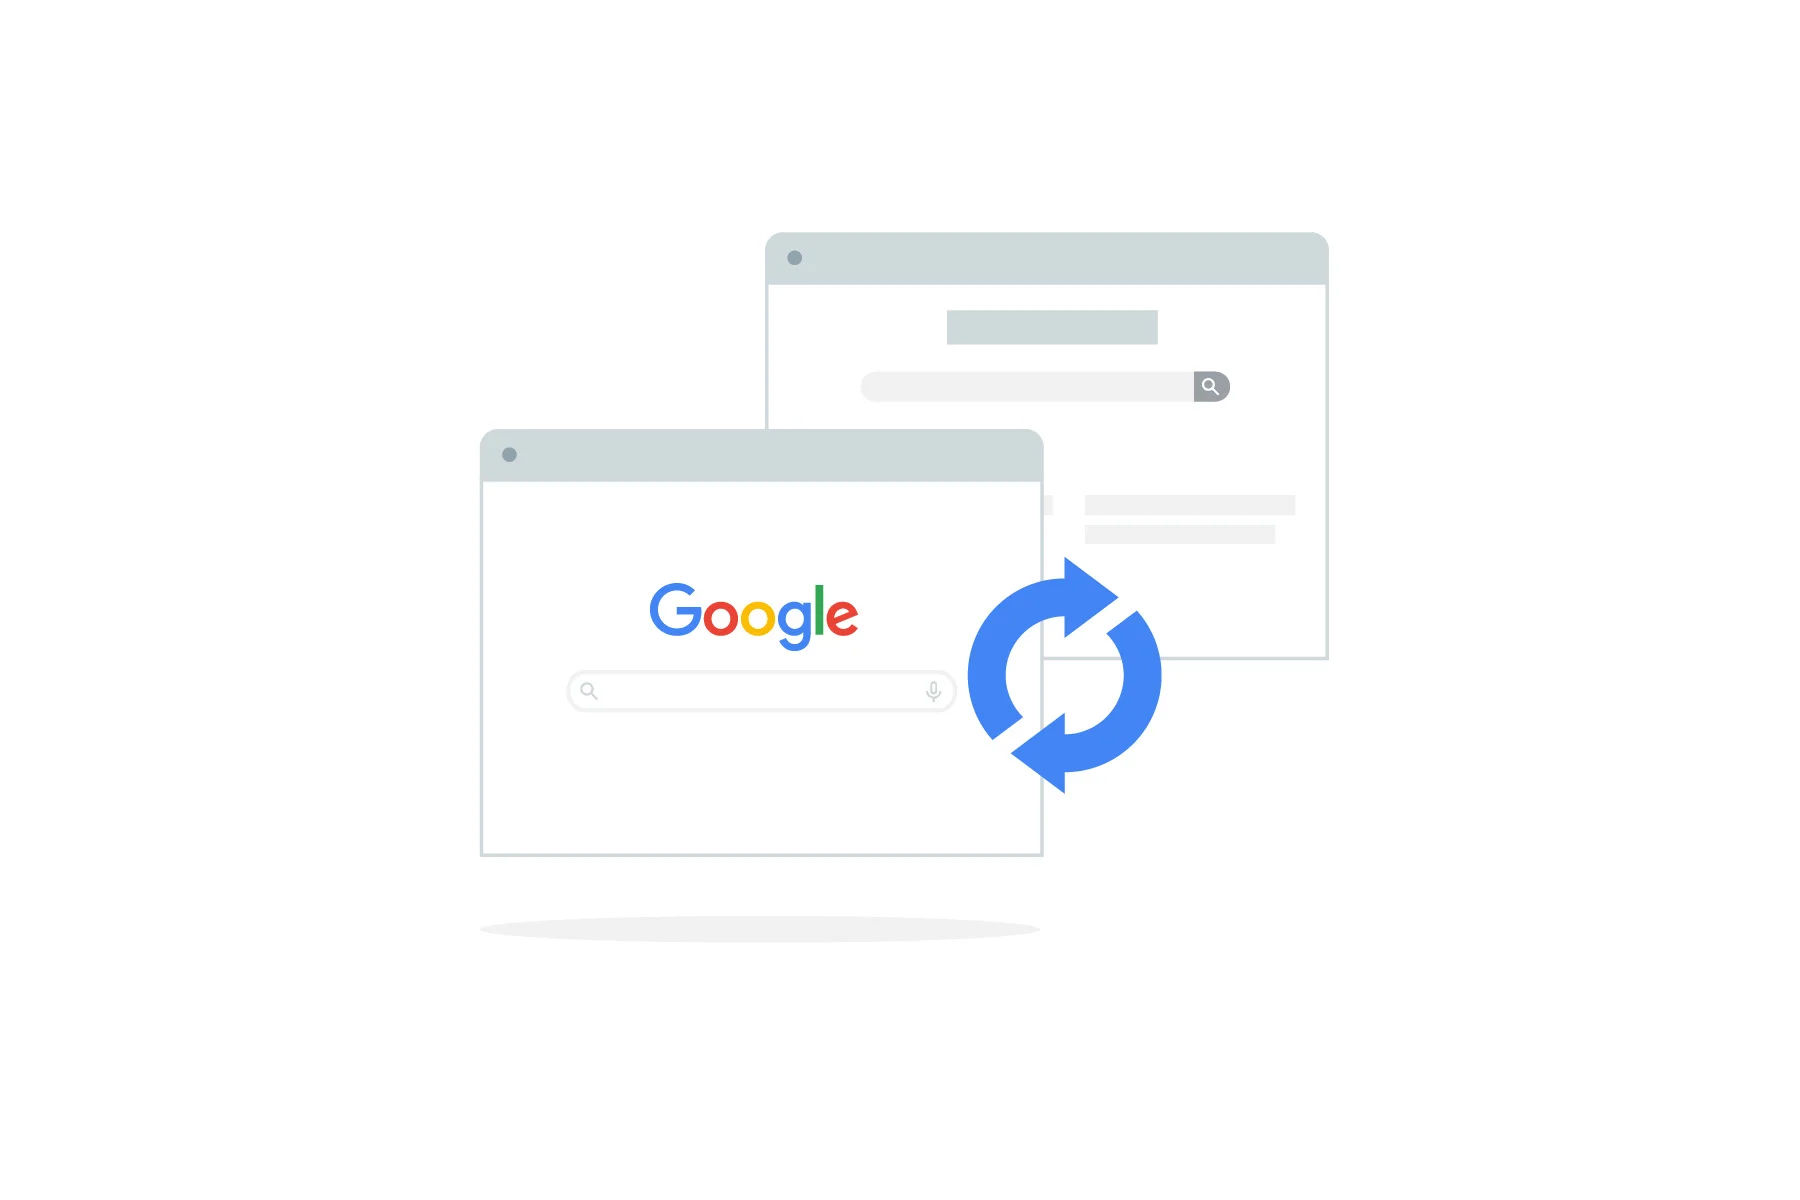 Two browser windows, one showing Google Search homepage and one showing another search homepage, with an icon representing easy switching.